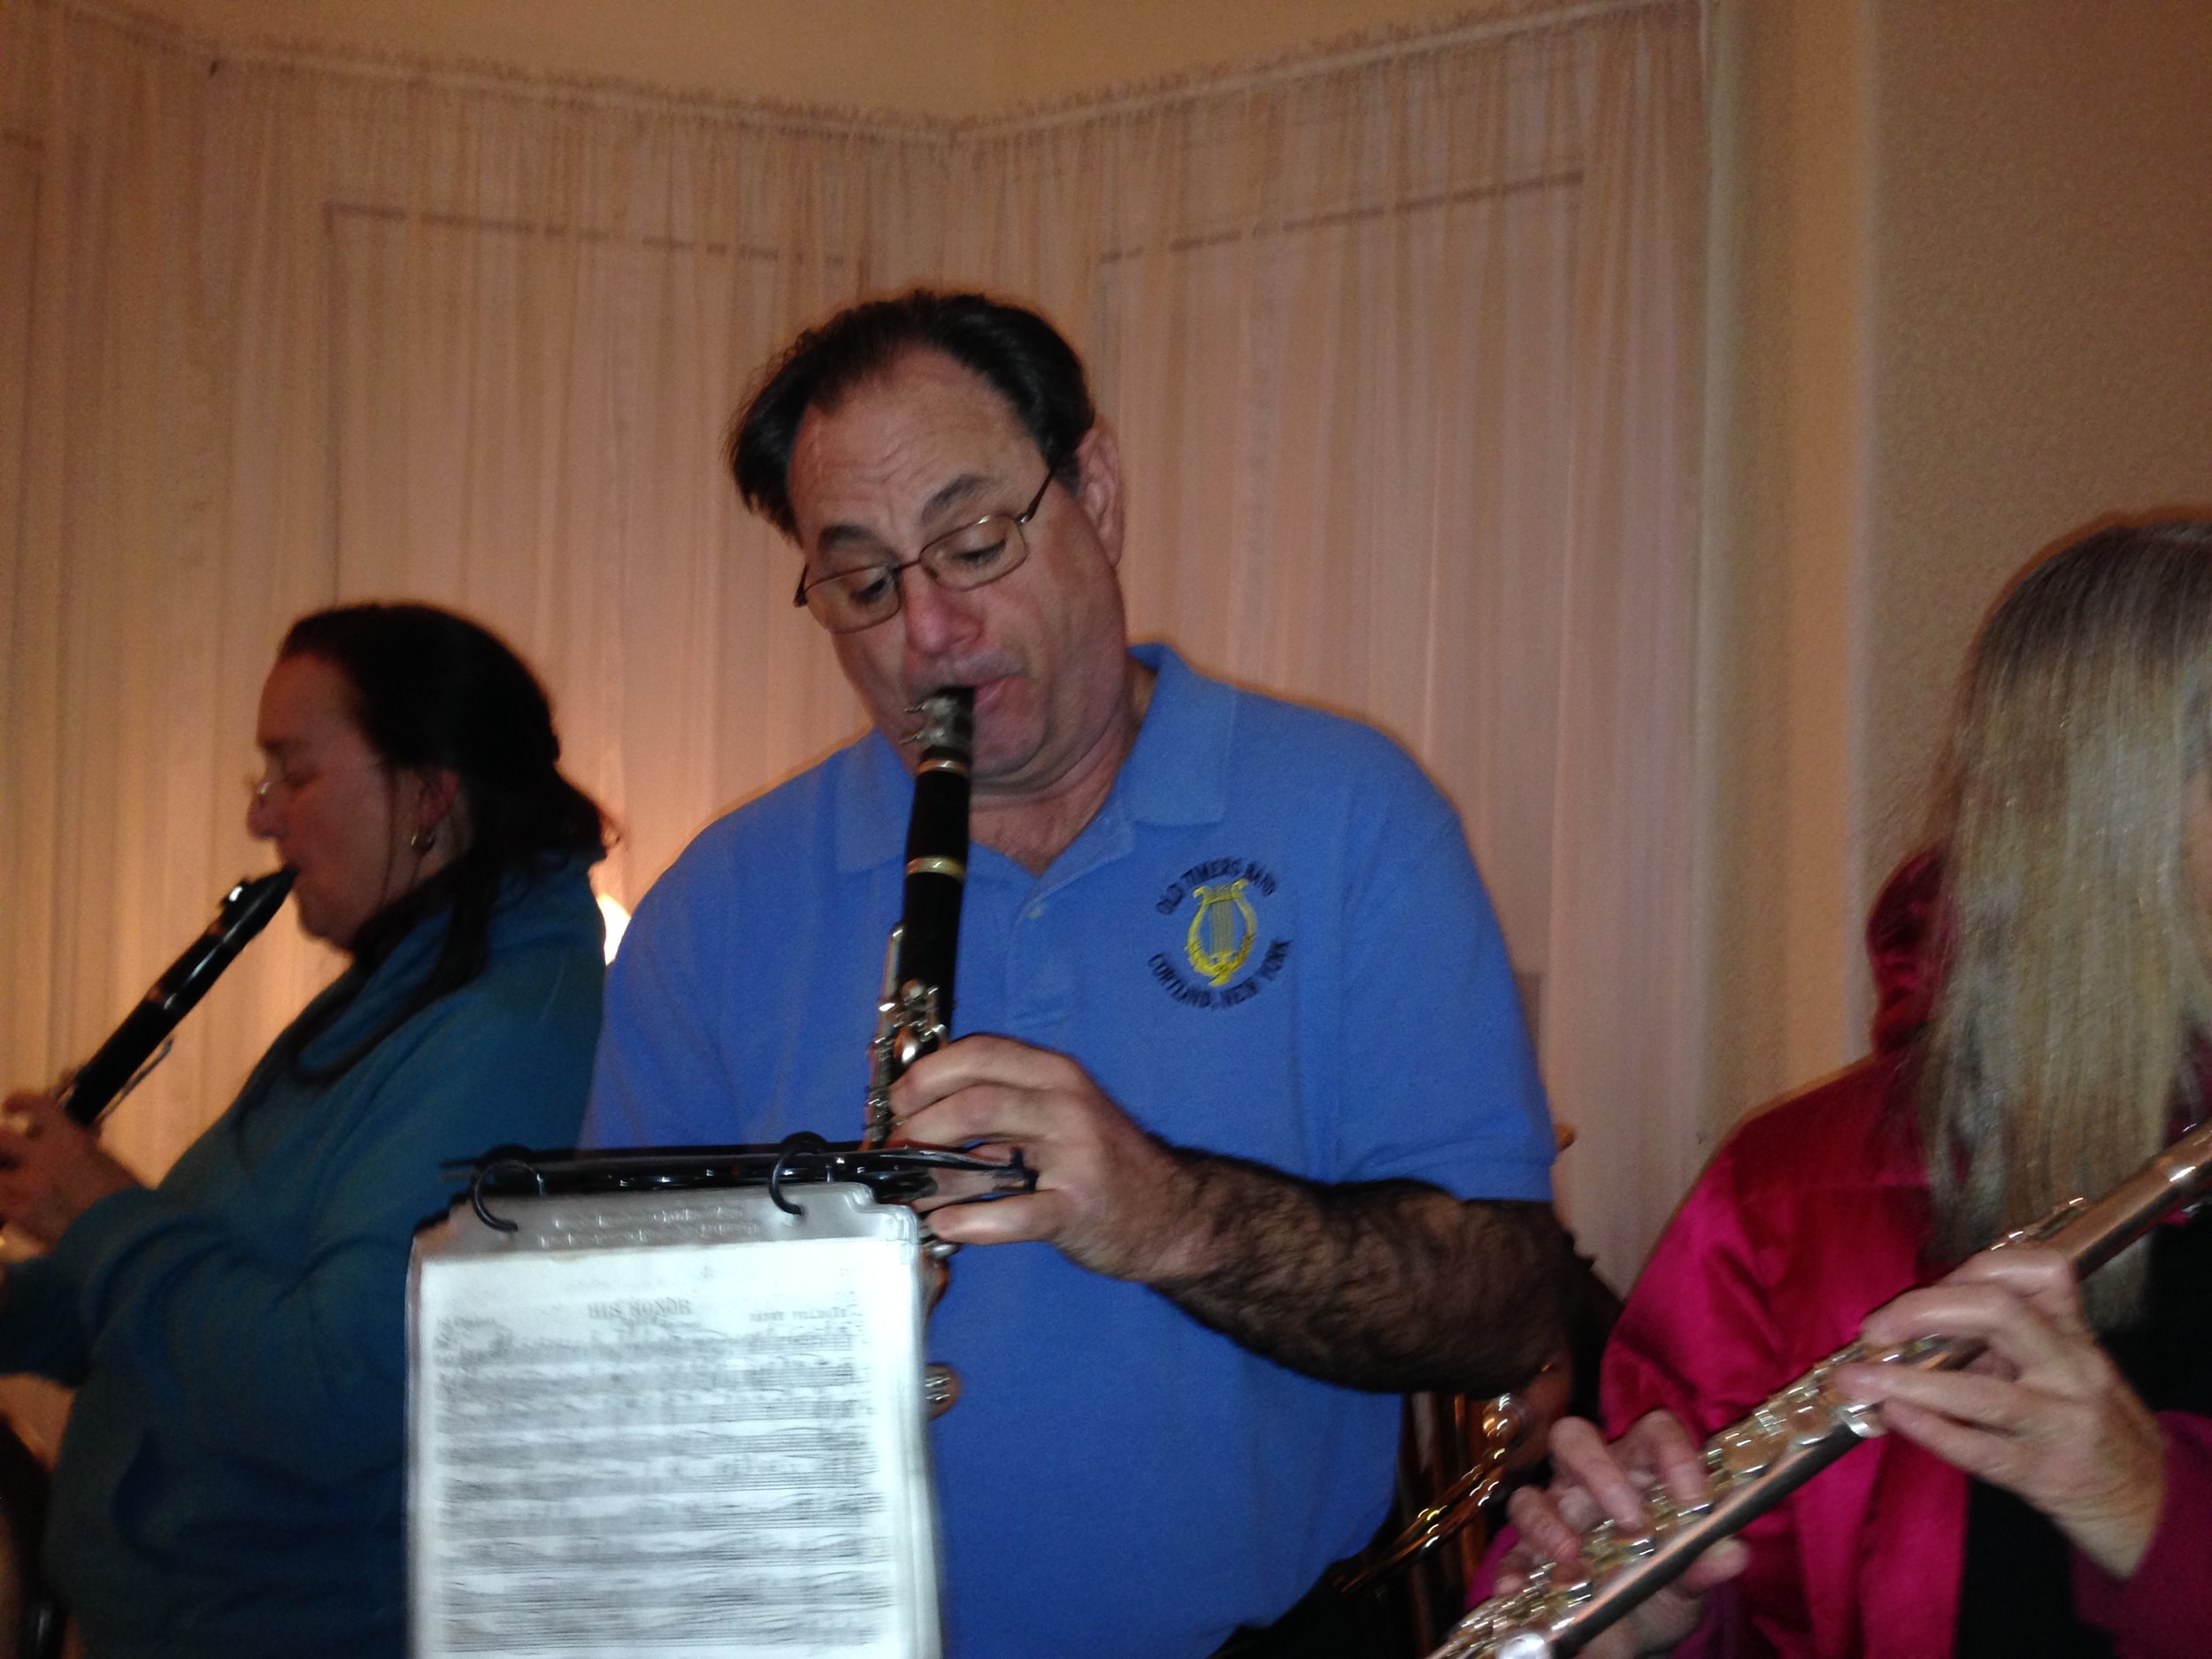  Joe Dovi and Catherine were clarinet duet partners and mentors to each other (2014) 